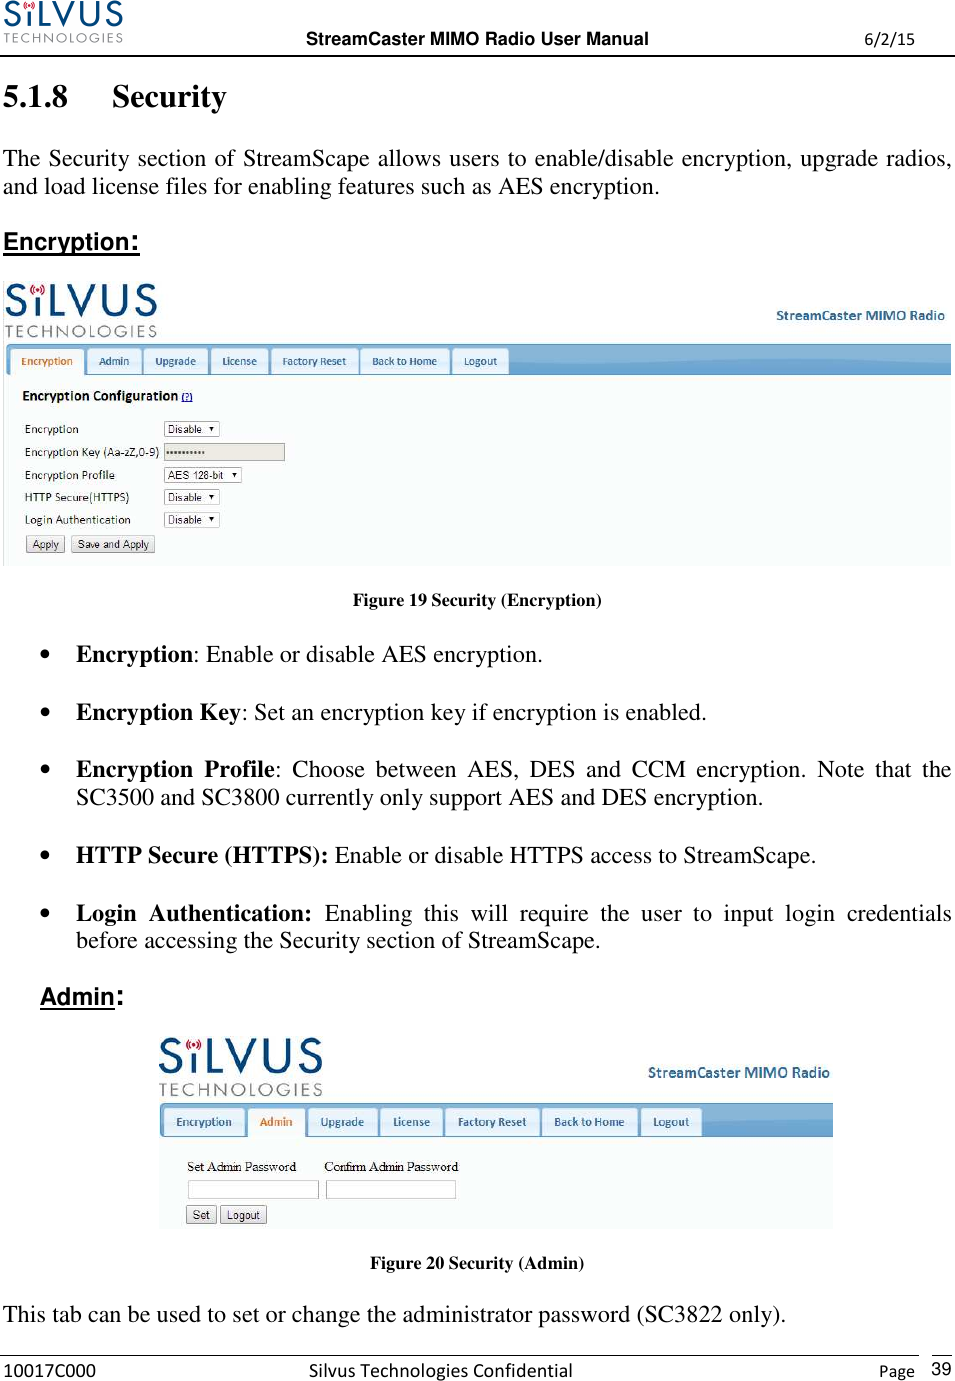  StreamCaster MIMO Radio User Manual  6/2/15 10017C000 Silvus Technologies Confidential    Page   39 5.1.8 Security The Security section of StreamScape allows users to enable/disable encryption, upgrade radios, and load license files for enabling features such as AES encryption. Encryption:  Figure 19 Security (Encryption) • Encryption: Enable or disable AES encryption.  • Encryption Key: Set an encryption key if encryption is enabled.  • Encryption  Profile:  Choose  between  AES,  DES  and  CCM  encryption.  Note  that  the SC3500 and SC3800 currently only support AES and DES encryption.  • HTTP Secure (HTTPS): Enable or disable HTTPS access to StreamScape.  • Login  Authentication:  Enabling  this  will  require  the  user  to  input  login  credentials before accessing the Security section of StreamScape. Admin:  Figure 20 Security (Admin) This tab can be used to set or change the administrator password (SC3822 only). 